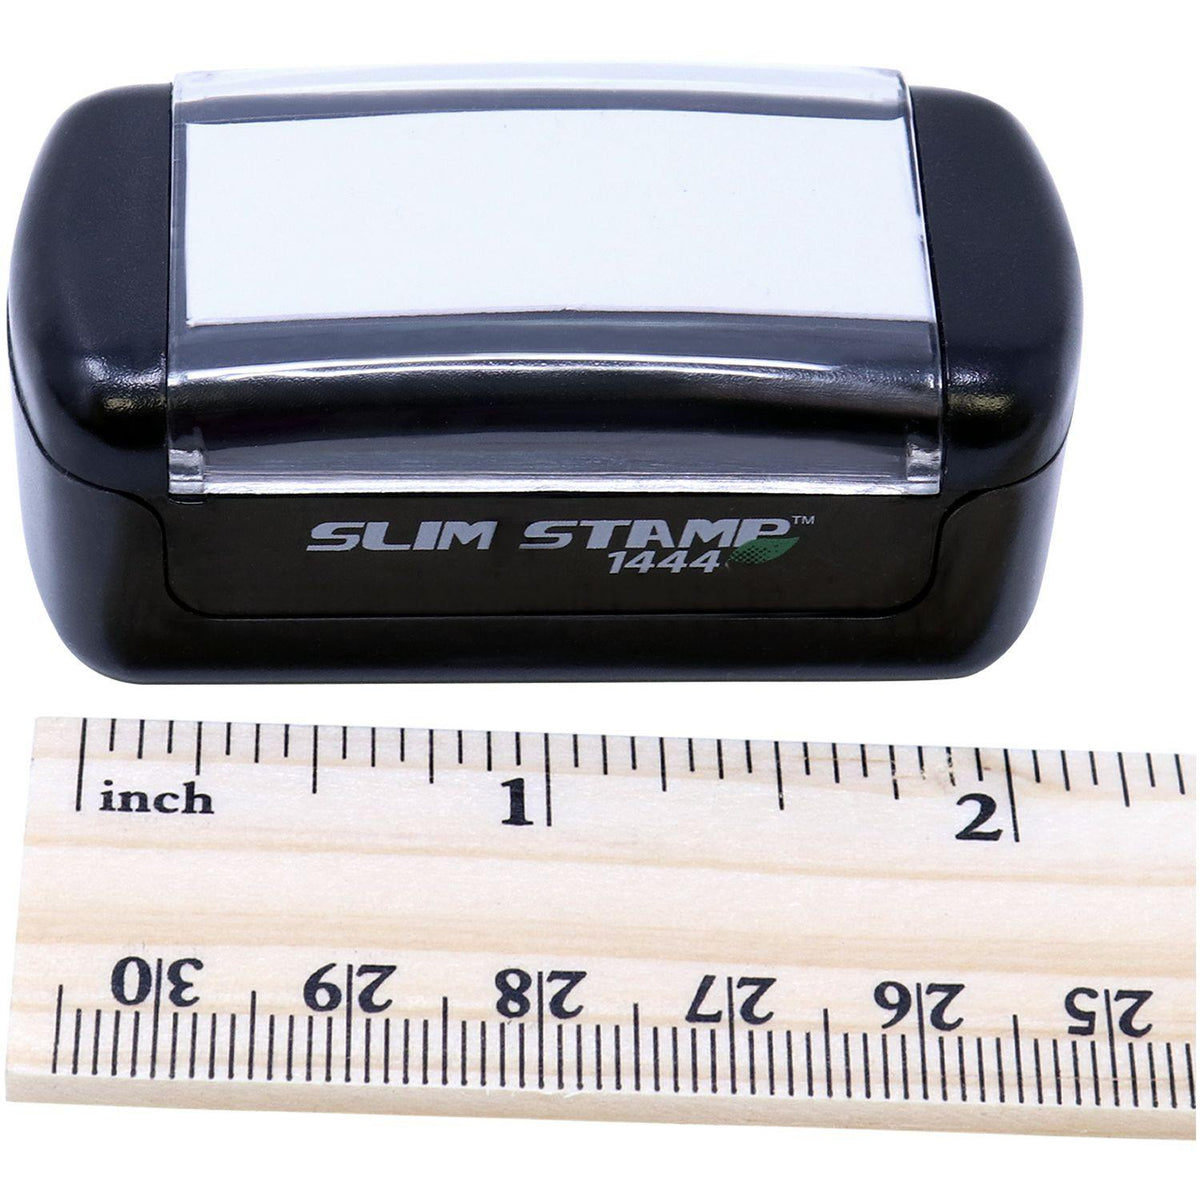 Measurement Slim Pre Inked Government Exhibit Stamp with Ruler